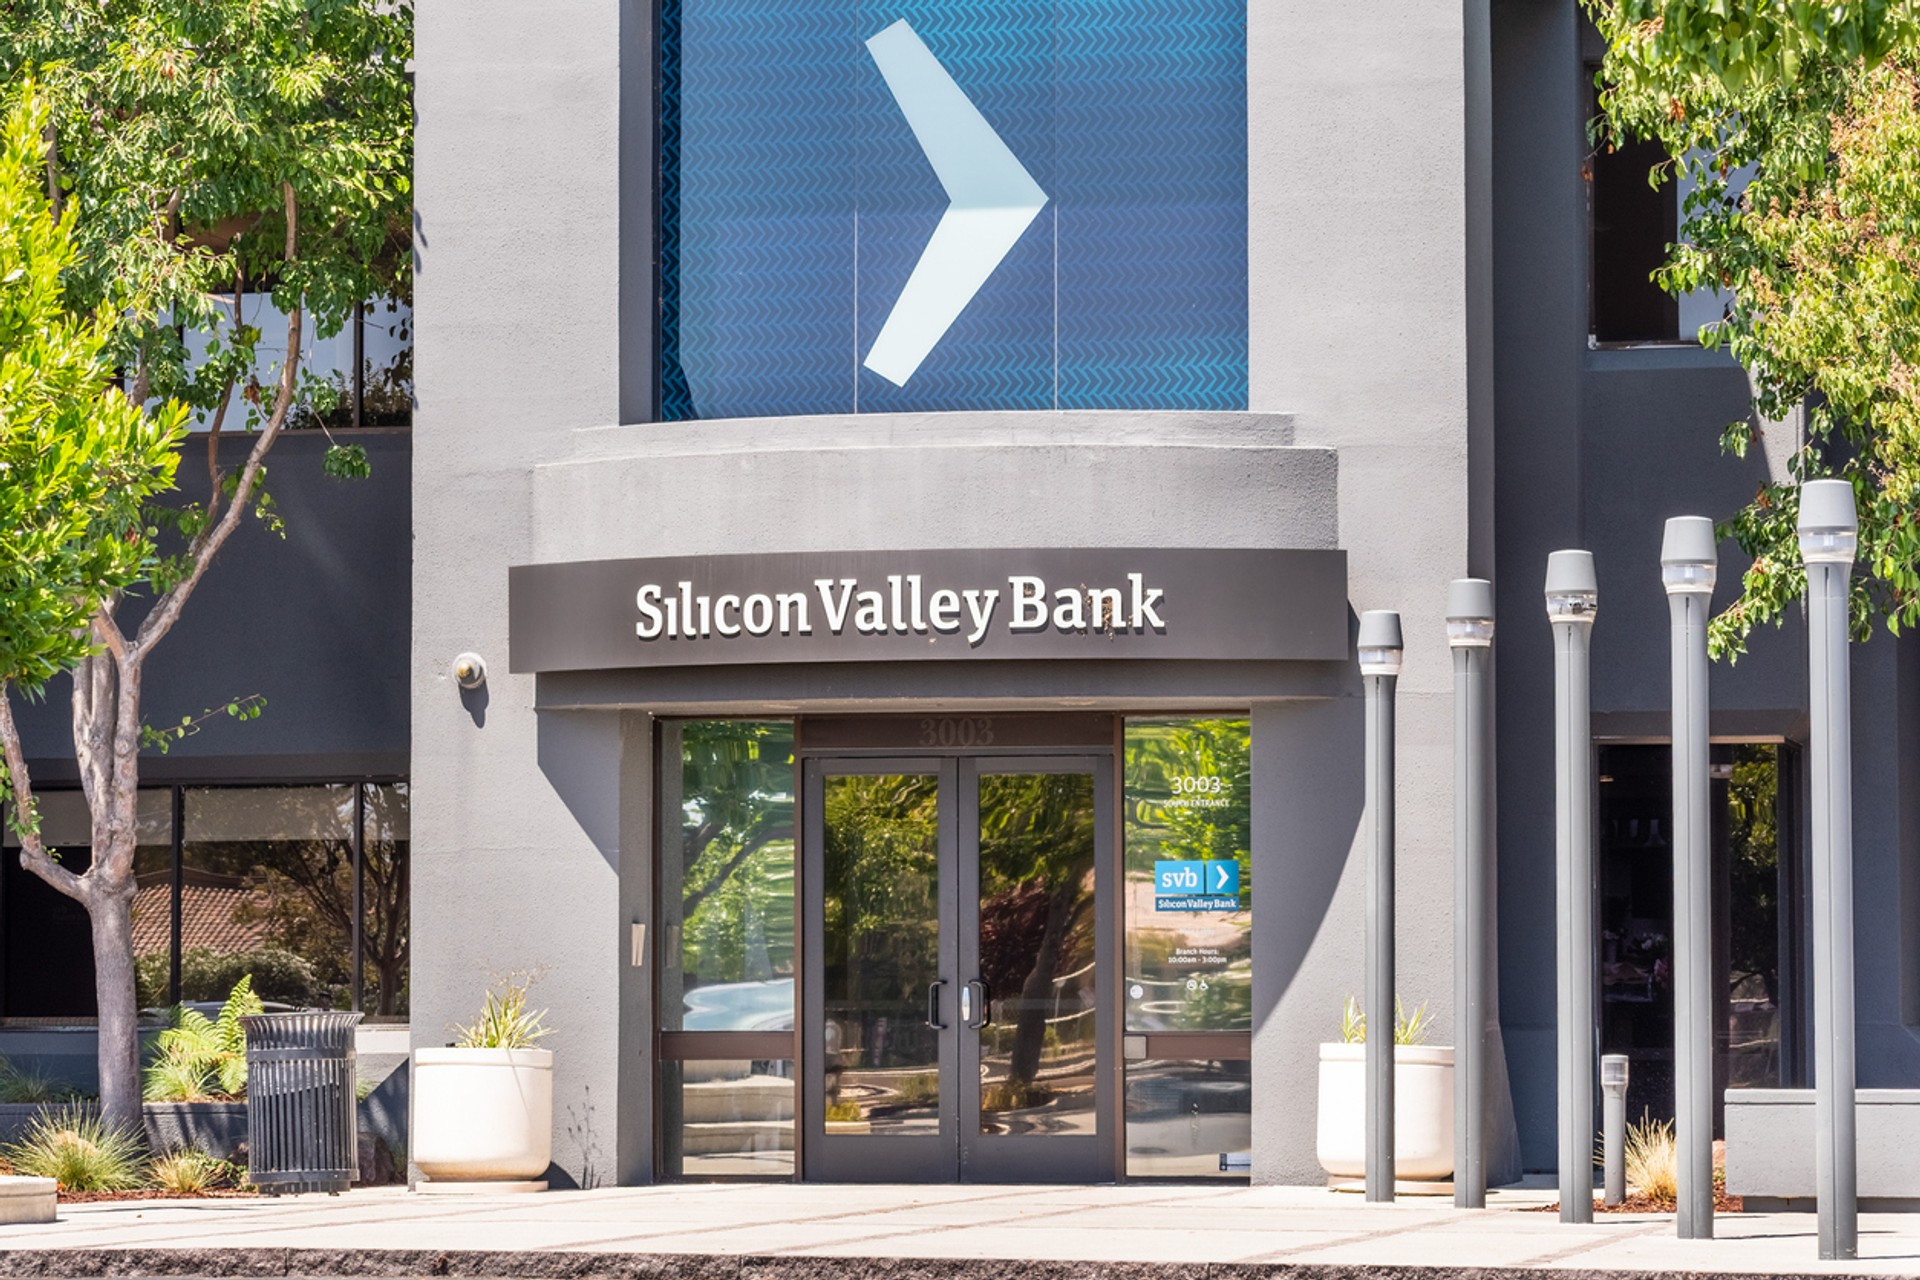 Helping businesses avoid single-thread risk - avoiding Silicon Balley Bank situation